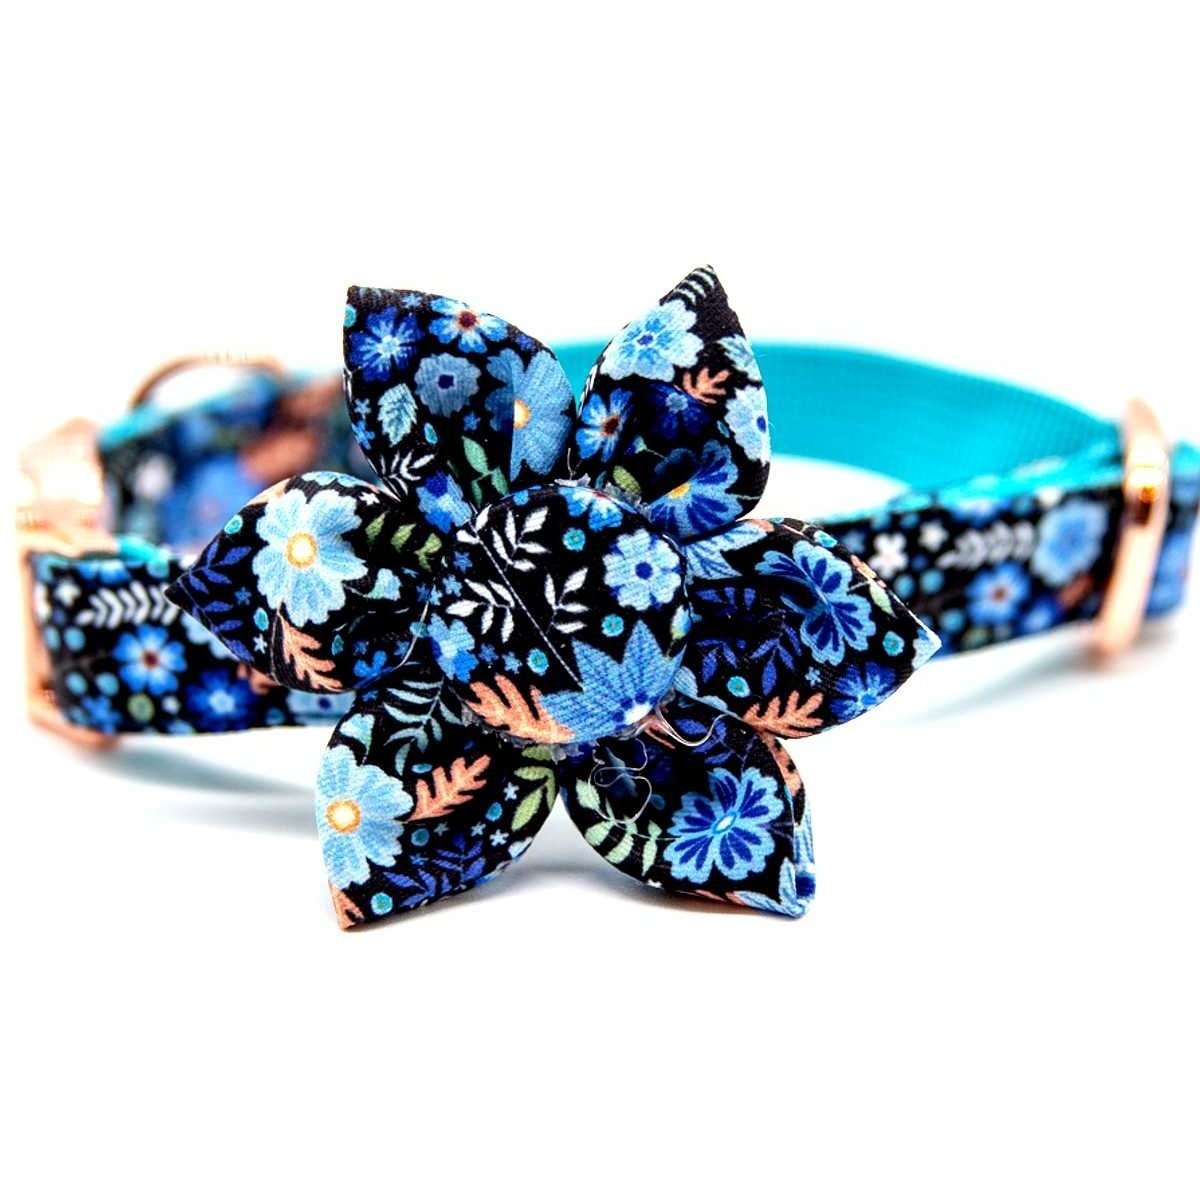 The Winter Blues Dog Bow